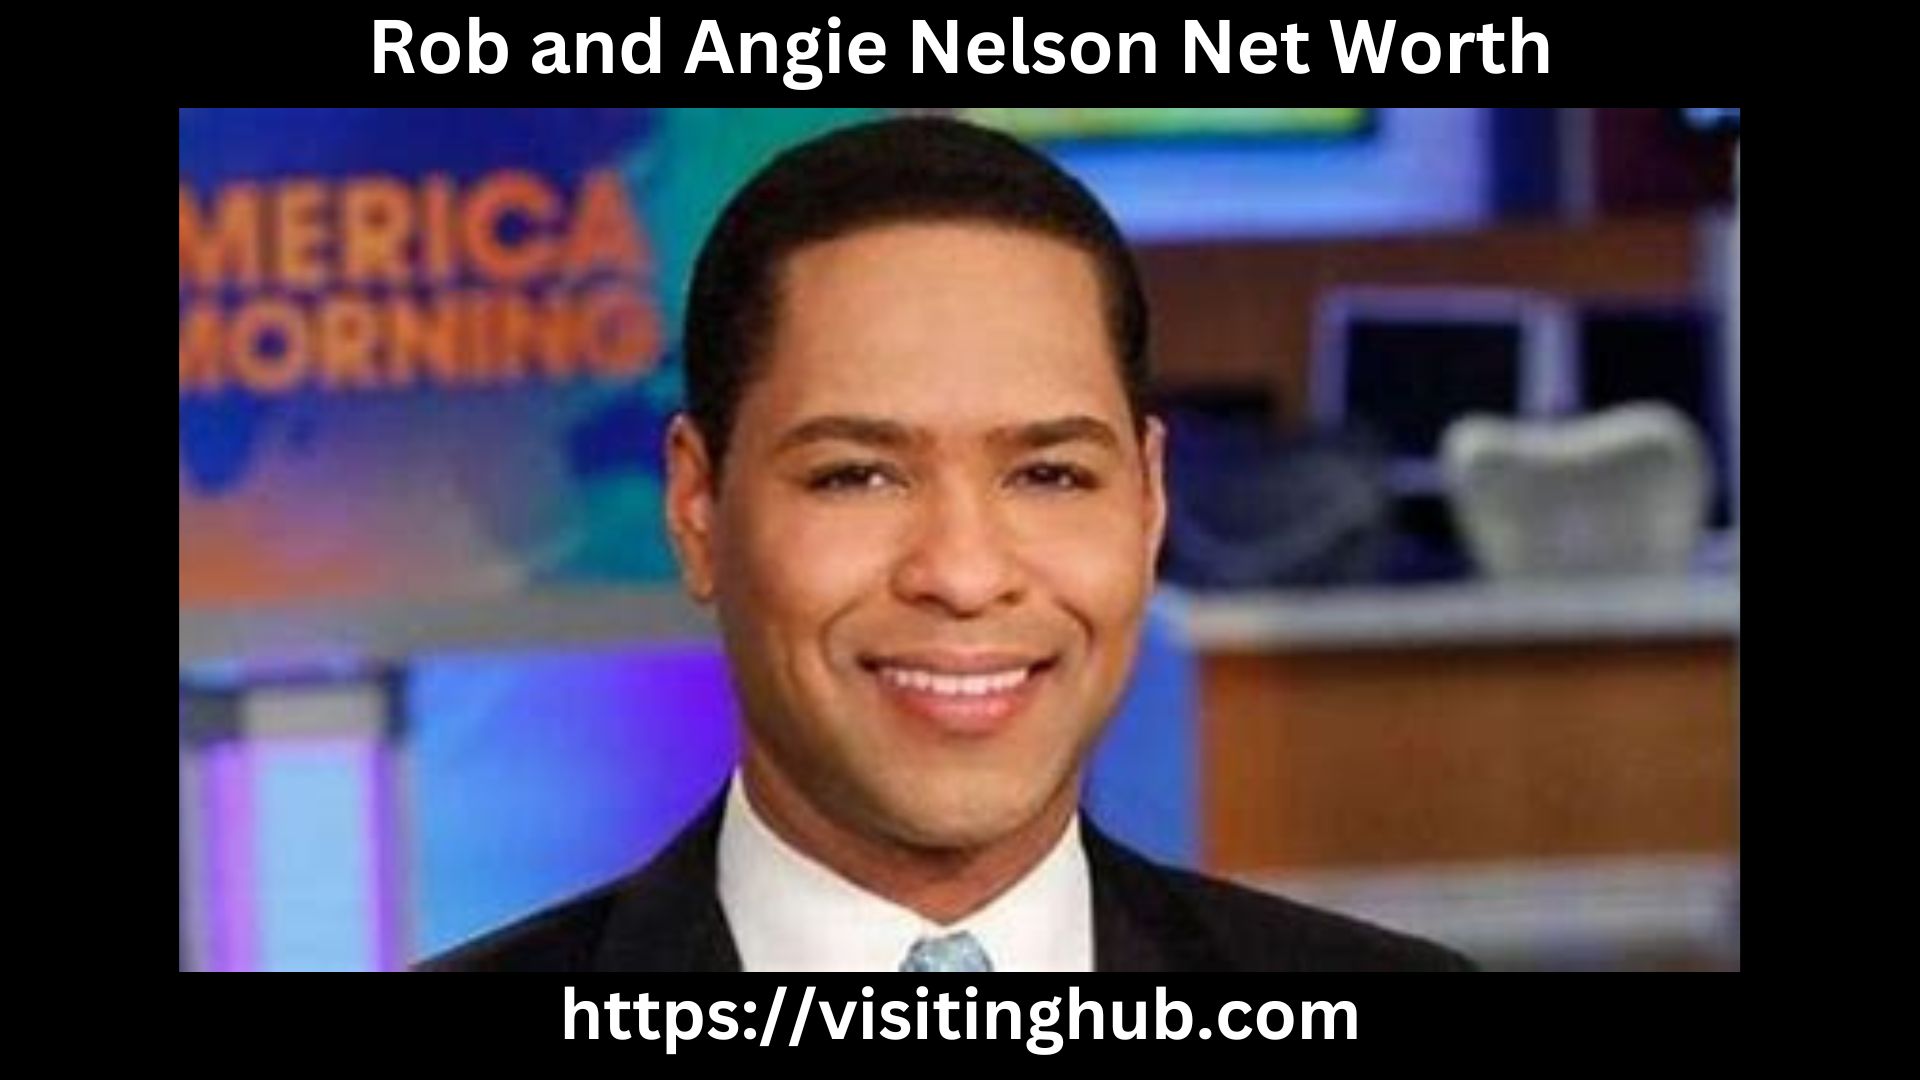 Rob and Angie Nelson Net Worth